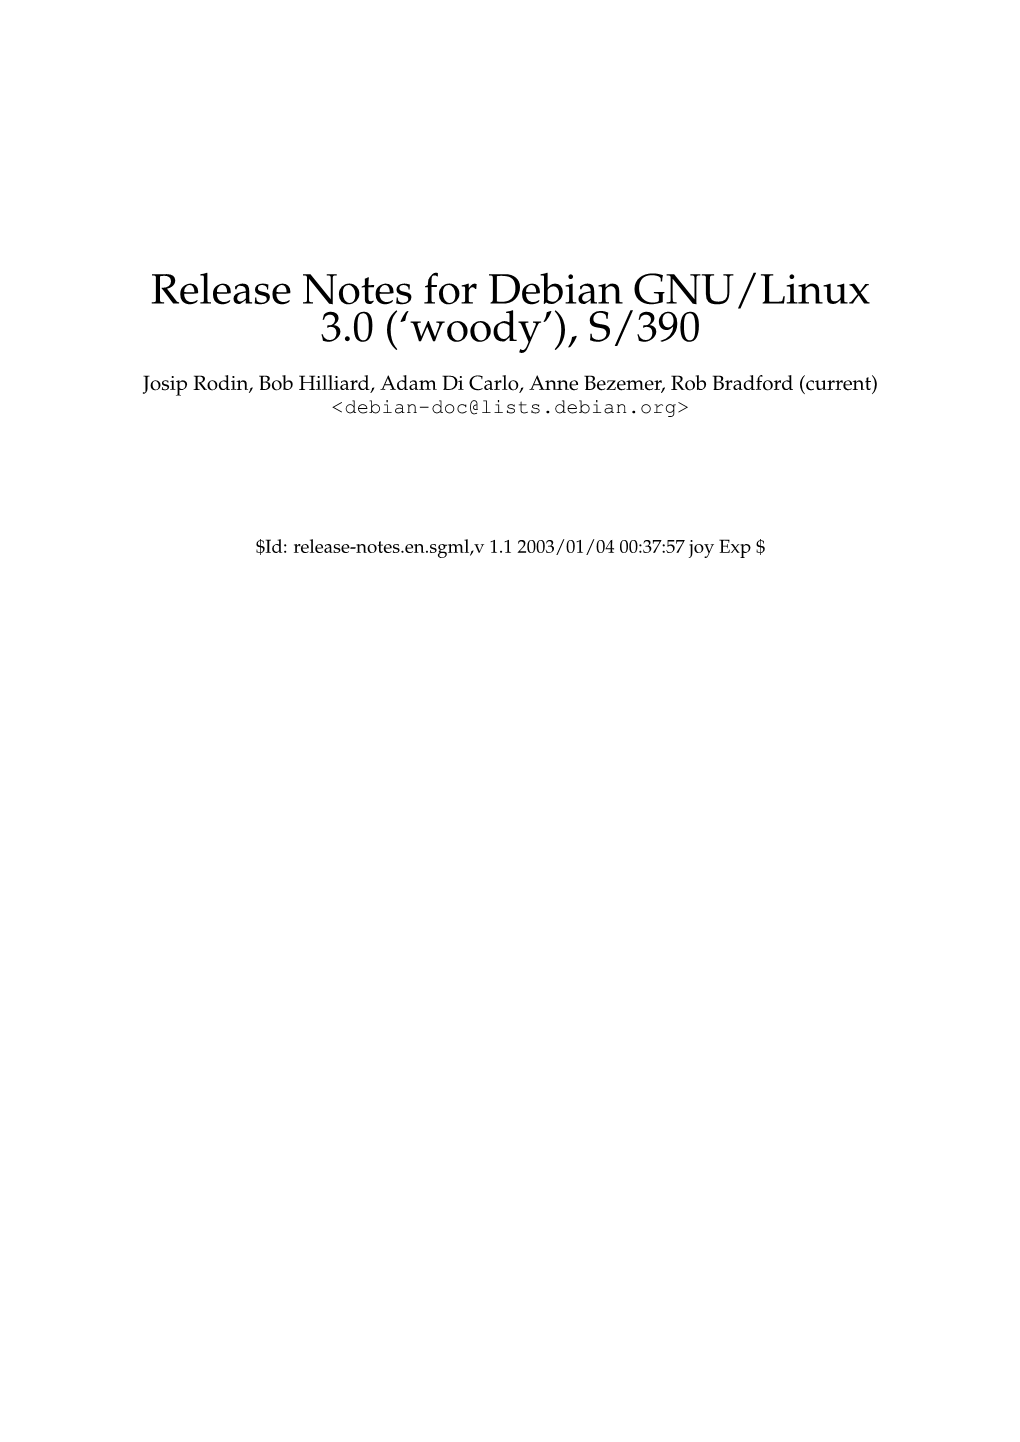 Release Notes for Debian GNU/Linux 3.0 ('Woody'), S/390